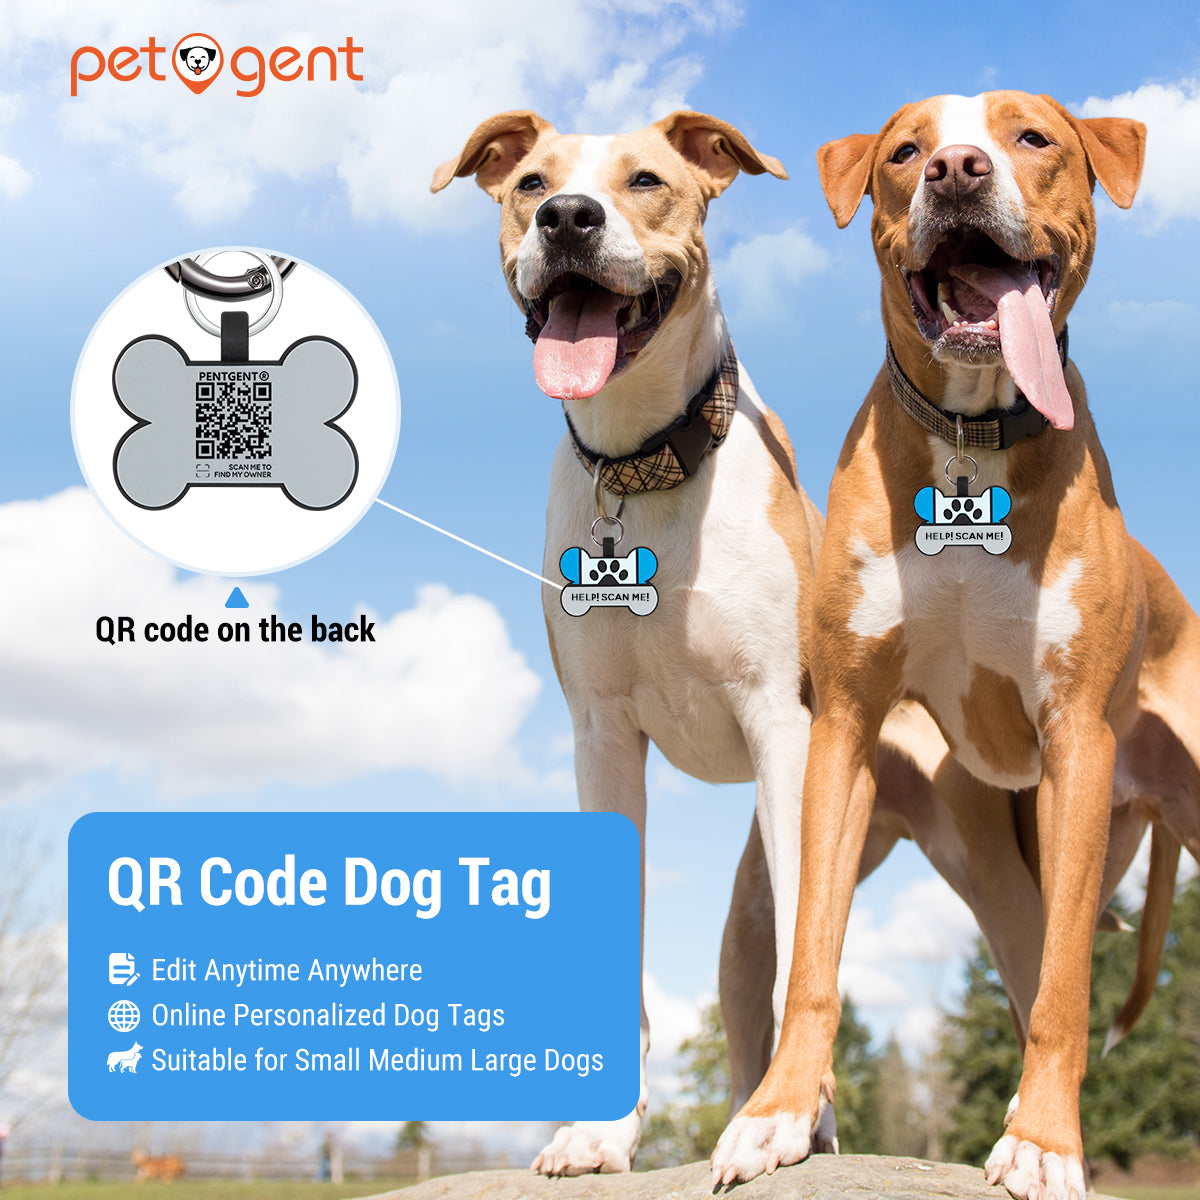 how can i make my dog tags quieter